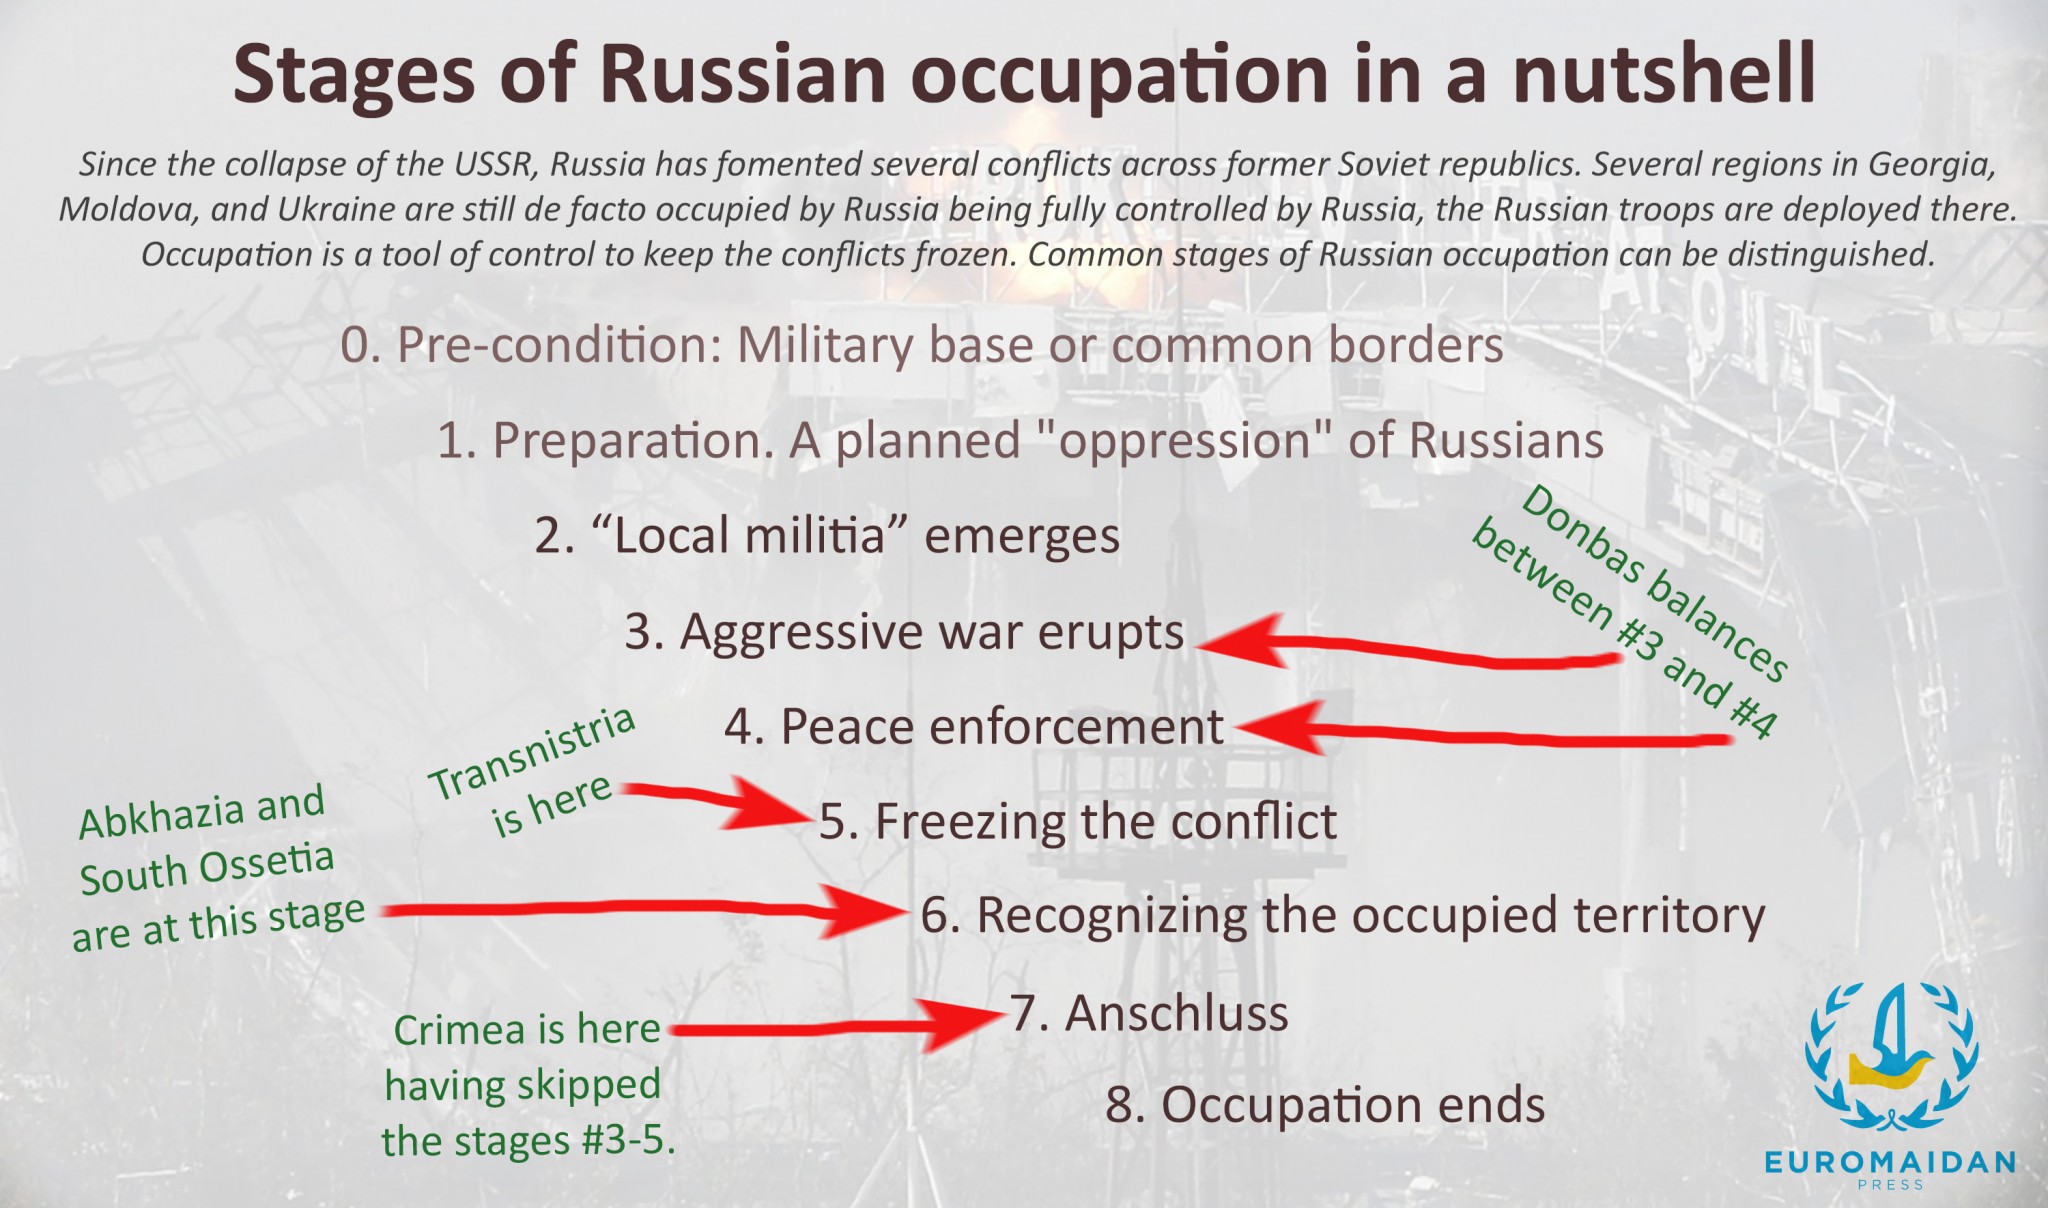 Stages of Russian occupation in a nutshell